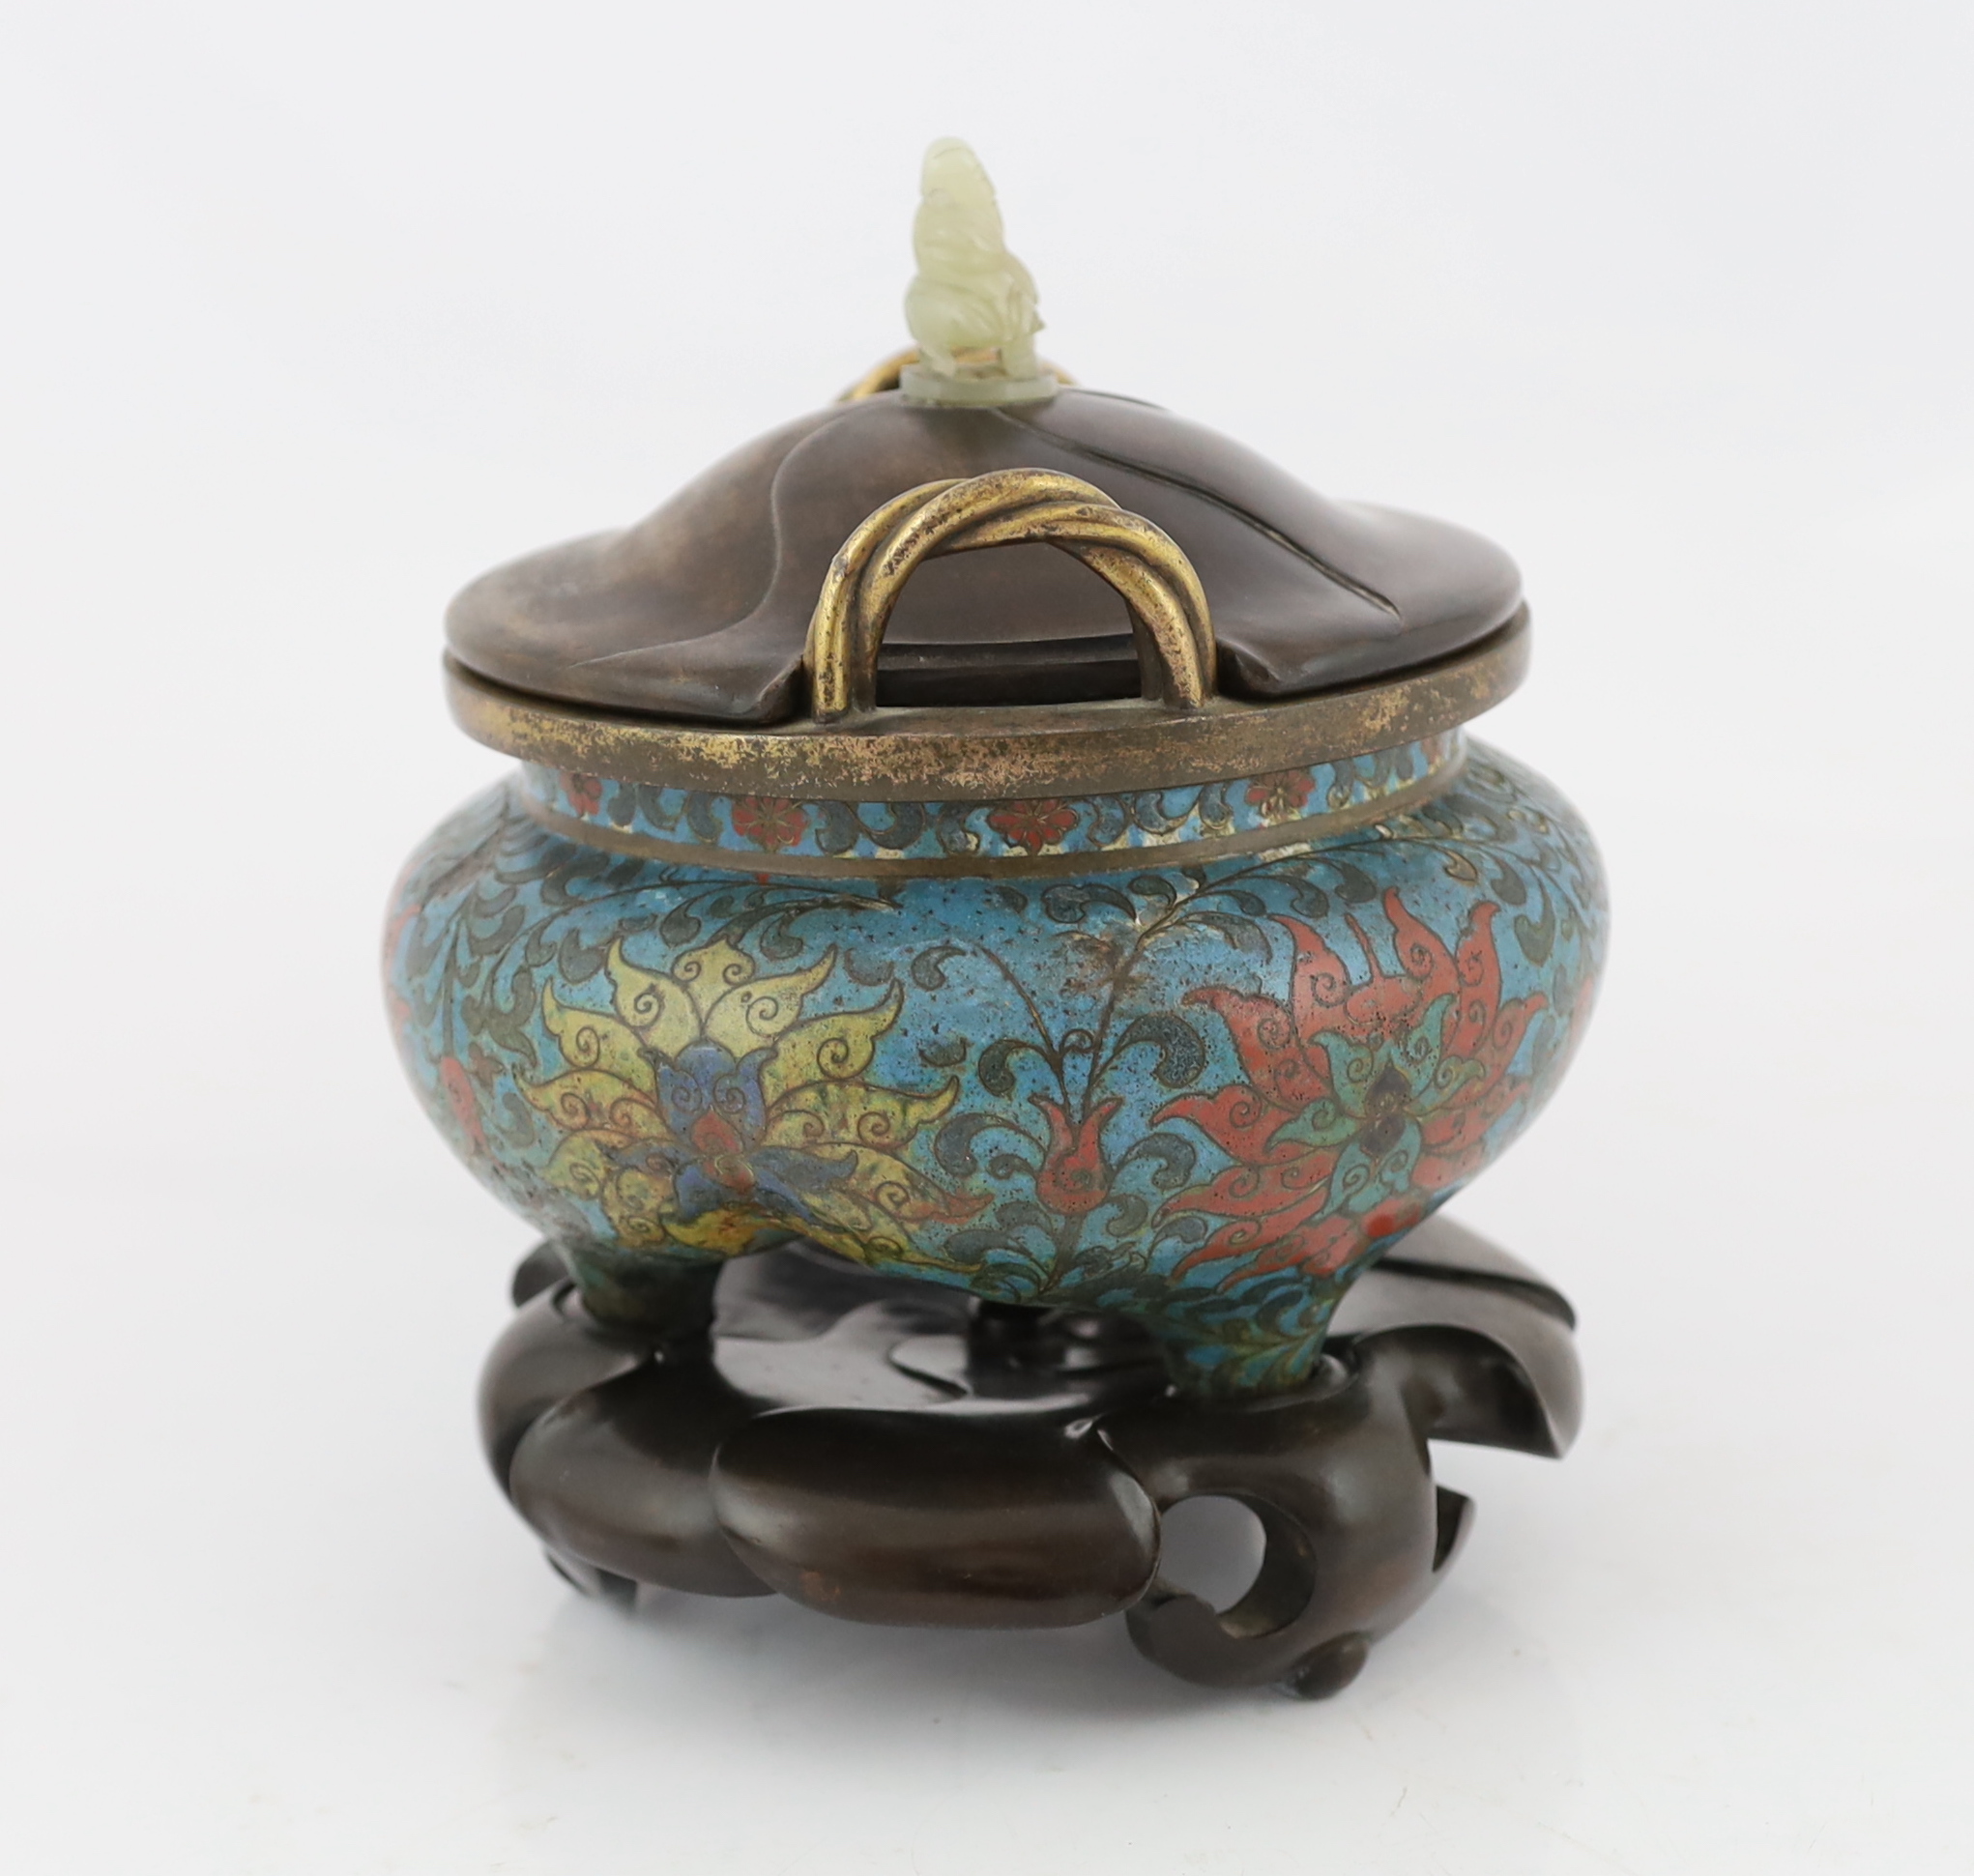 A Chinese cloisonné enamel tripod censer, Li, Xuande six character mark, Ming dynasty, 16th century, - Image 5 of 8